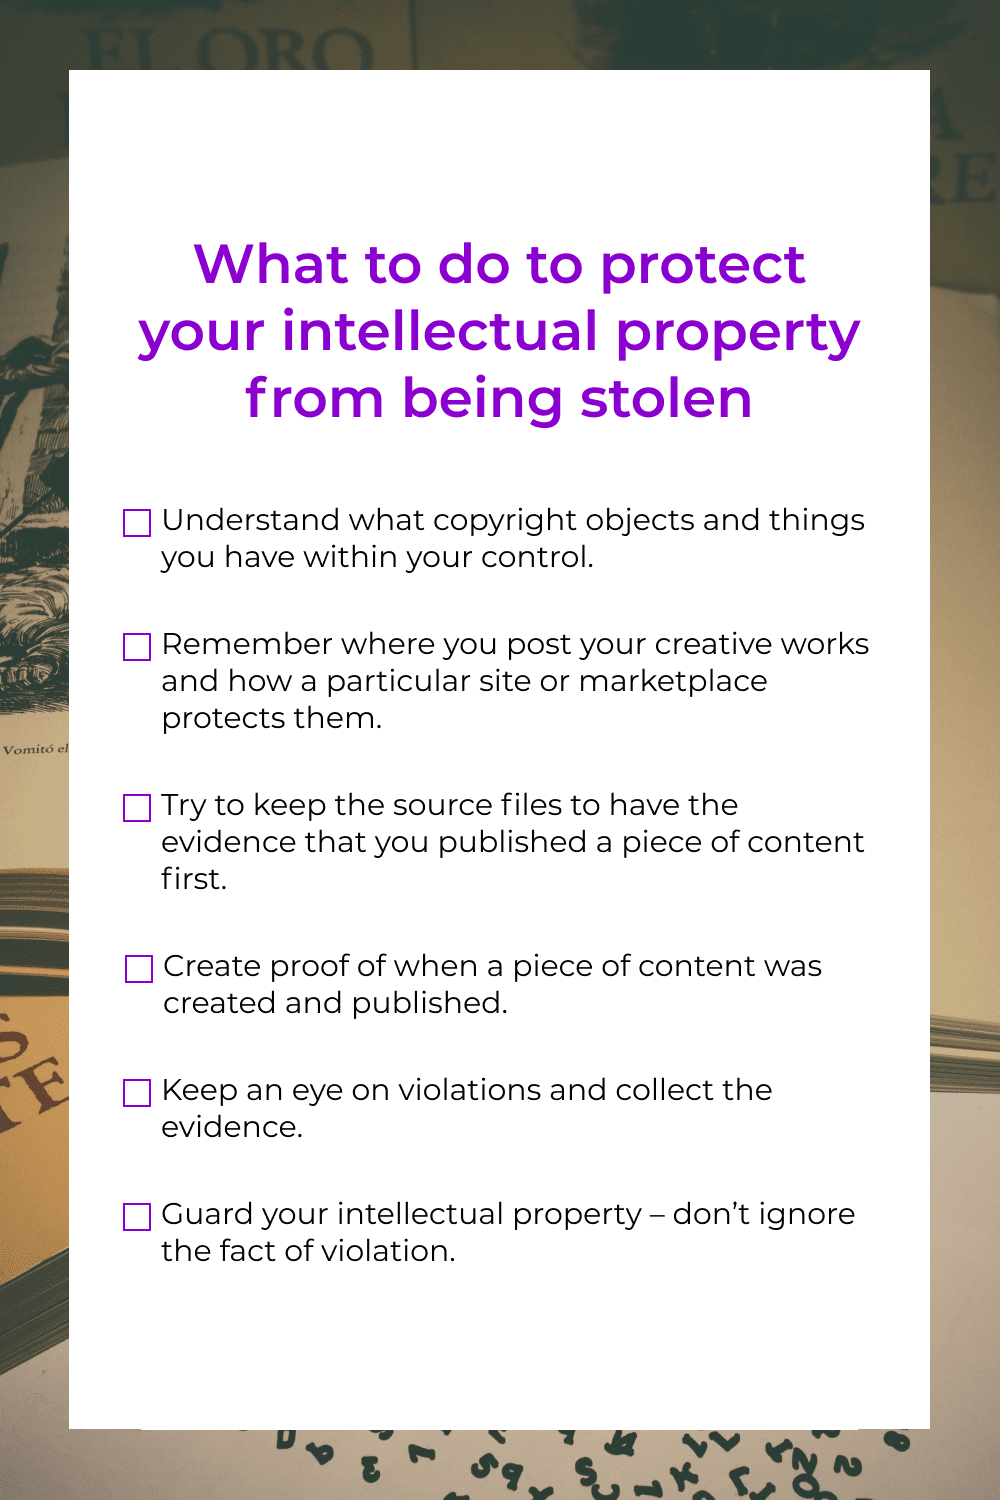 a free checklist on what to do to protect intellectual property.